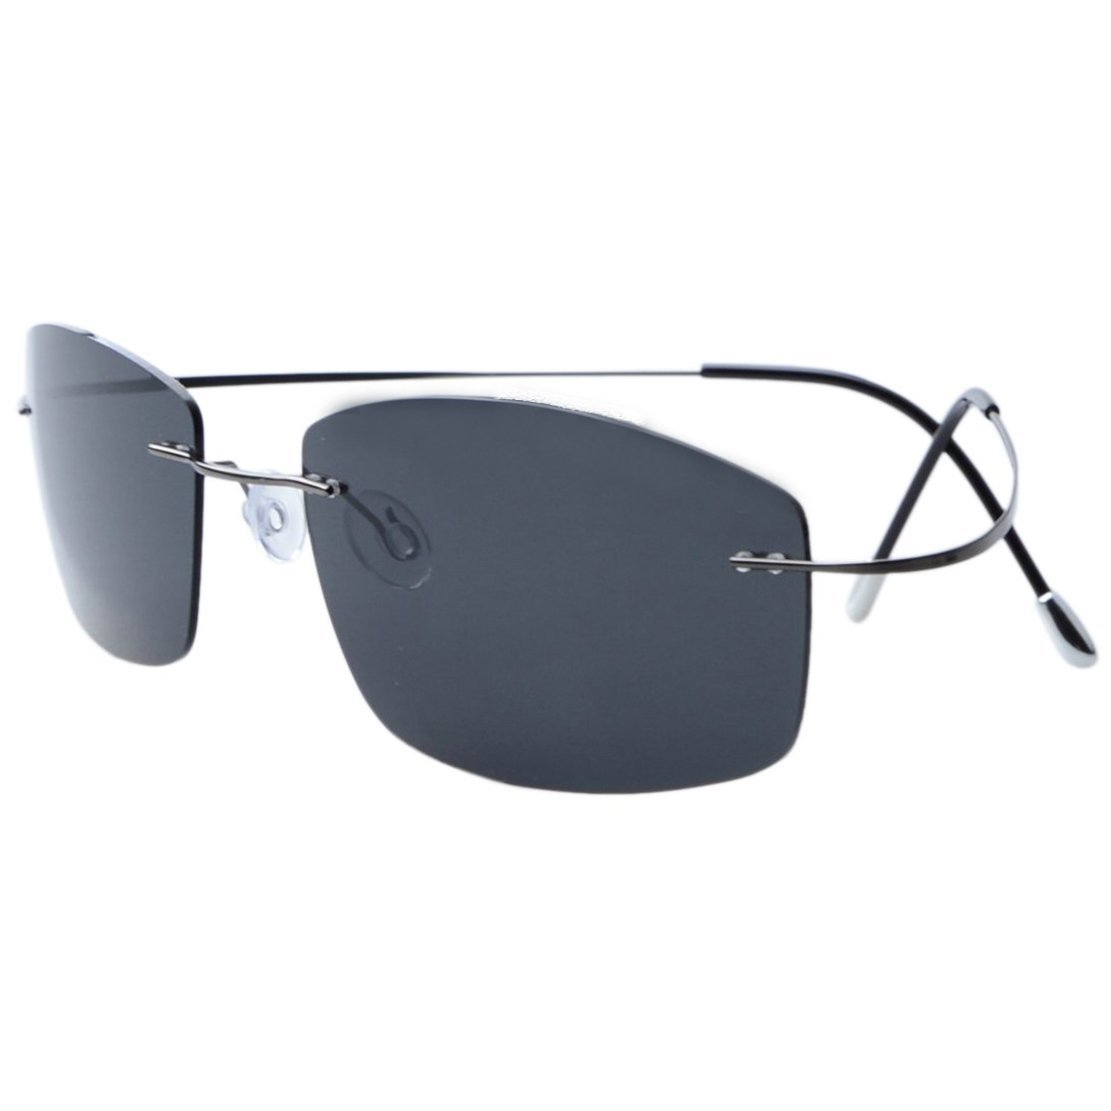 Designer Mens Optical CYCLONE METAL Rimless Sunglasses Mens With Clear Lens  And Silver Metal Frame Z1701U From Super_supplier88, $43.84